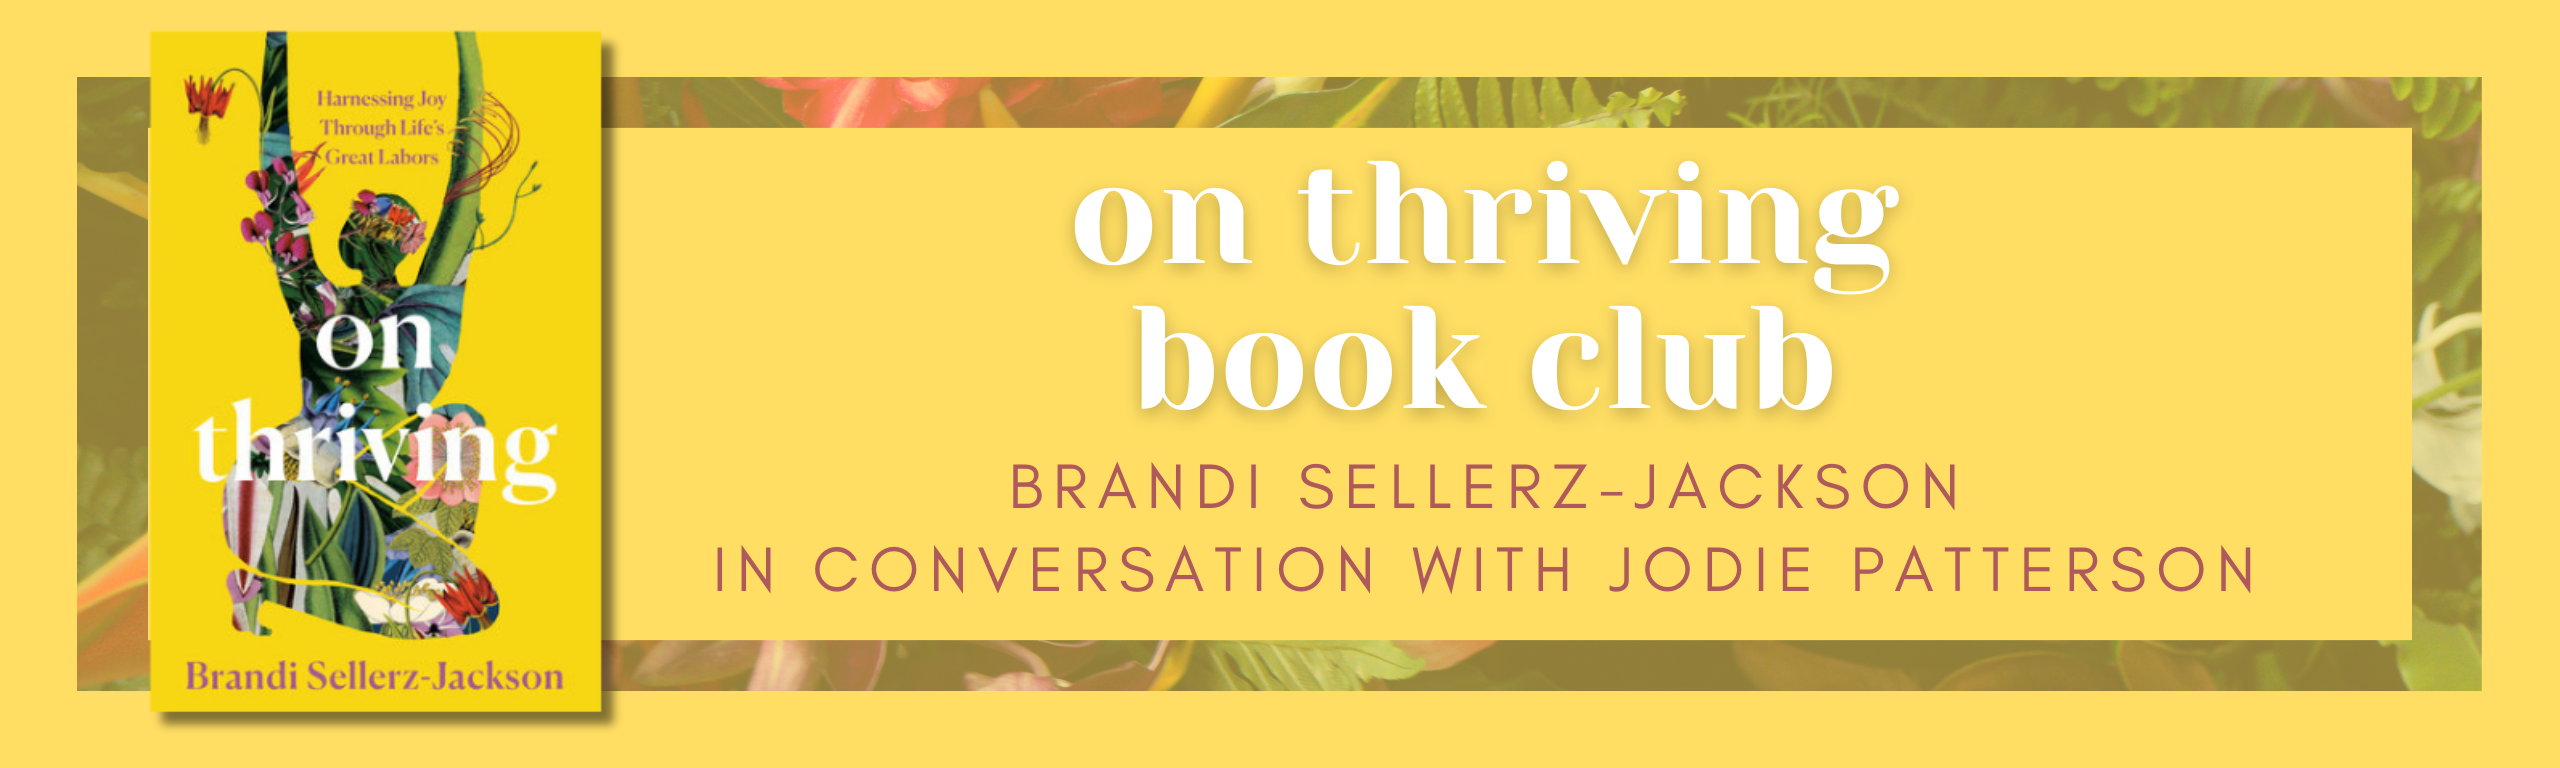 ON THRIVING Book Club